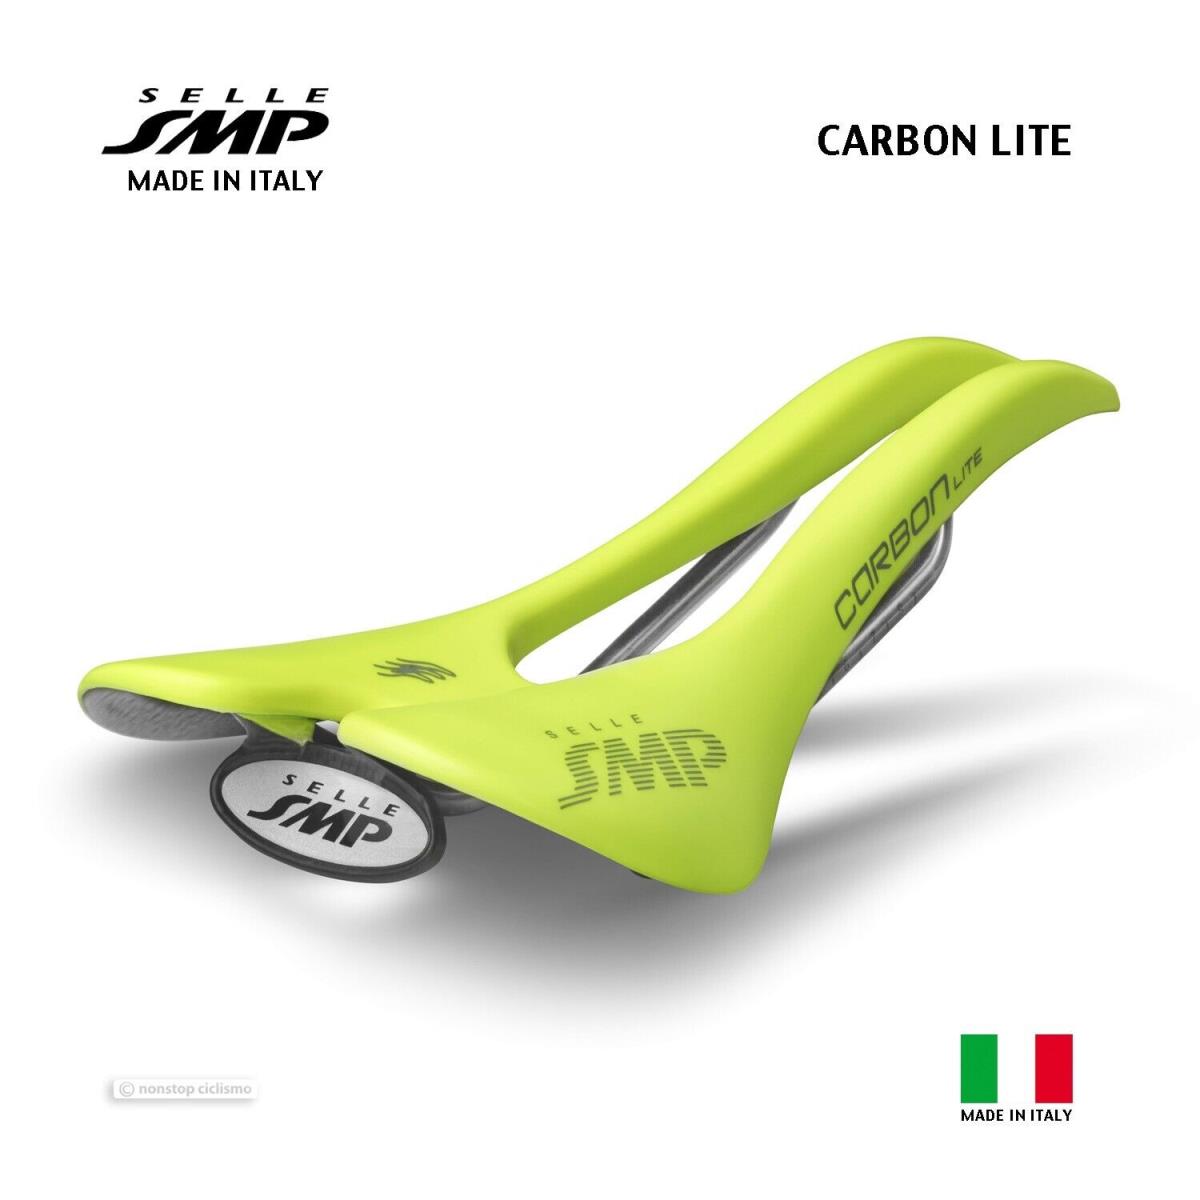 Selle Smp Carbon Lite Saddle : Yellow Fluo - Made IN Italy - Yellow Fluo